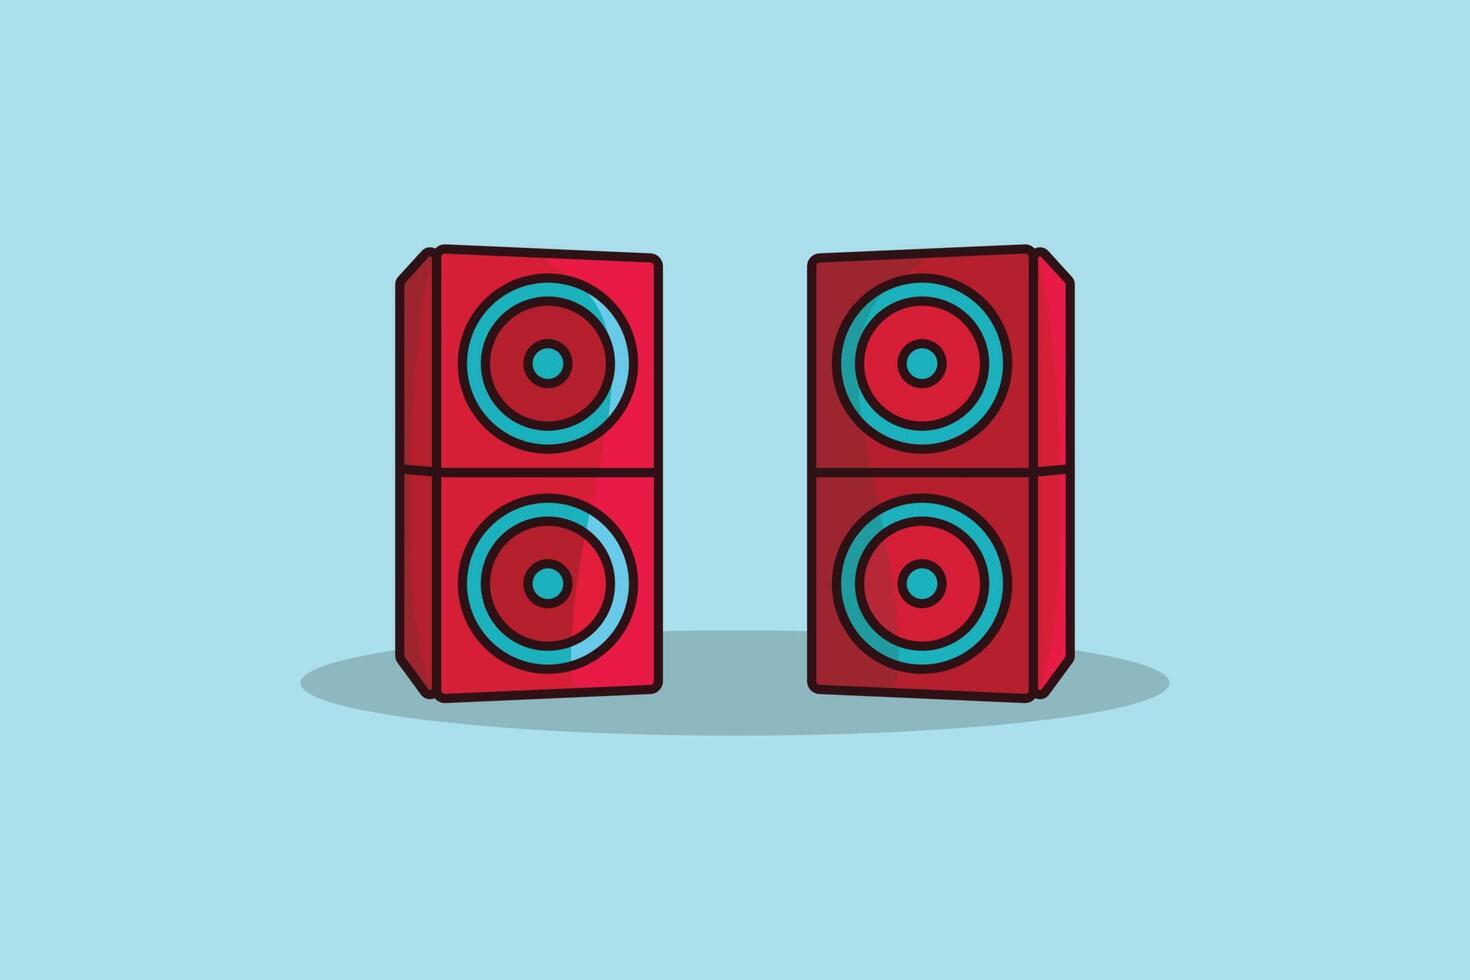 Modern Two Acoustic System Red Audio Speaker vector illustration. Musical instrument icon concept. Electronic bass device for listening music enjoying sound of speaker vector design with shadow.